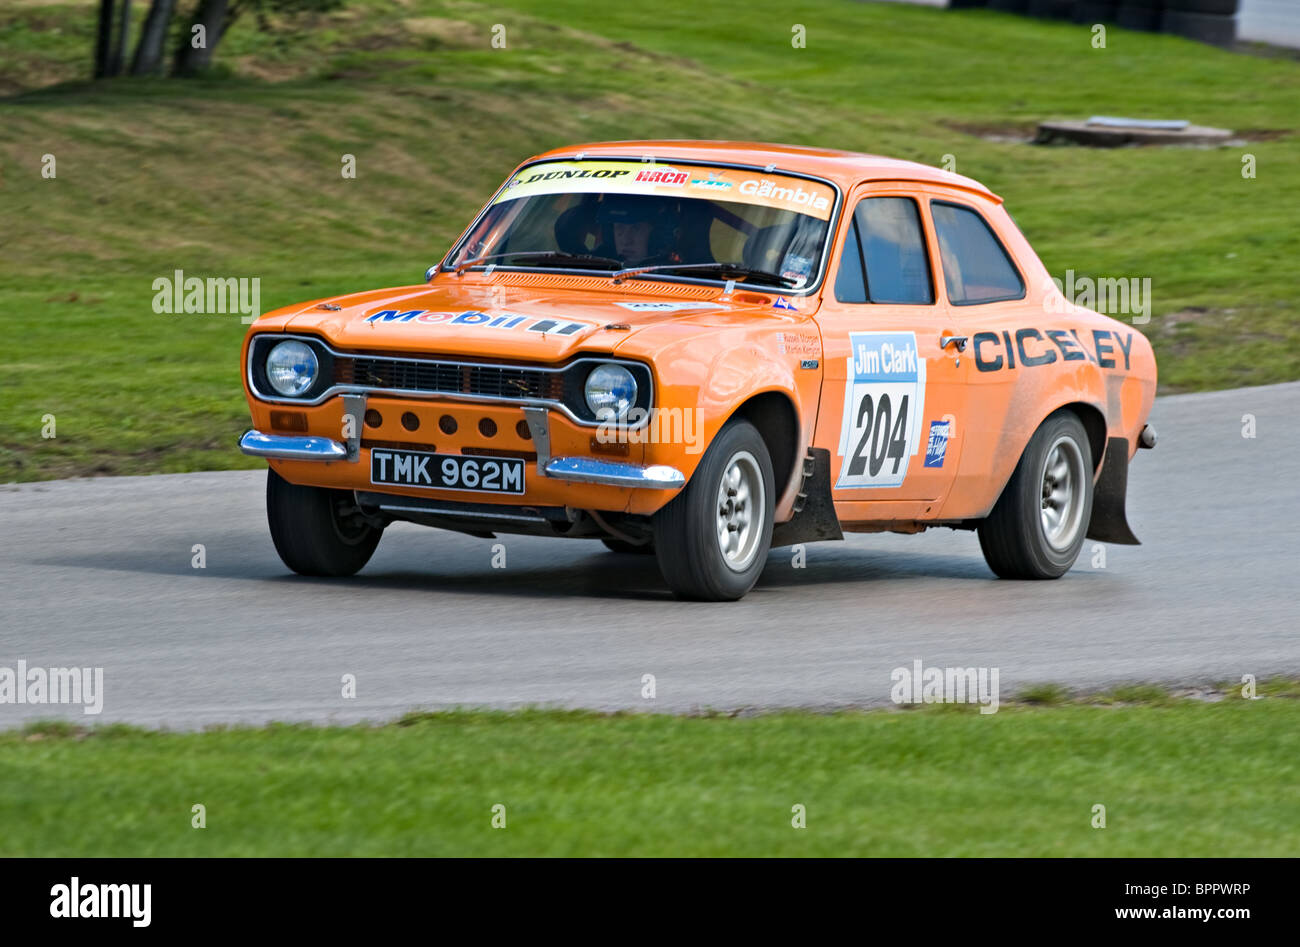 mark-i-ford-escort-rs2000-rally-car-on-rally-track-at-oulton-park-BPPWRP.jpg